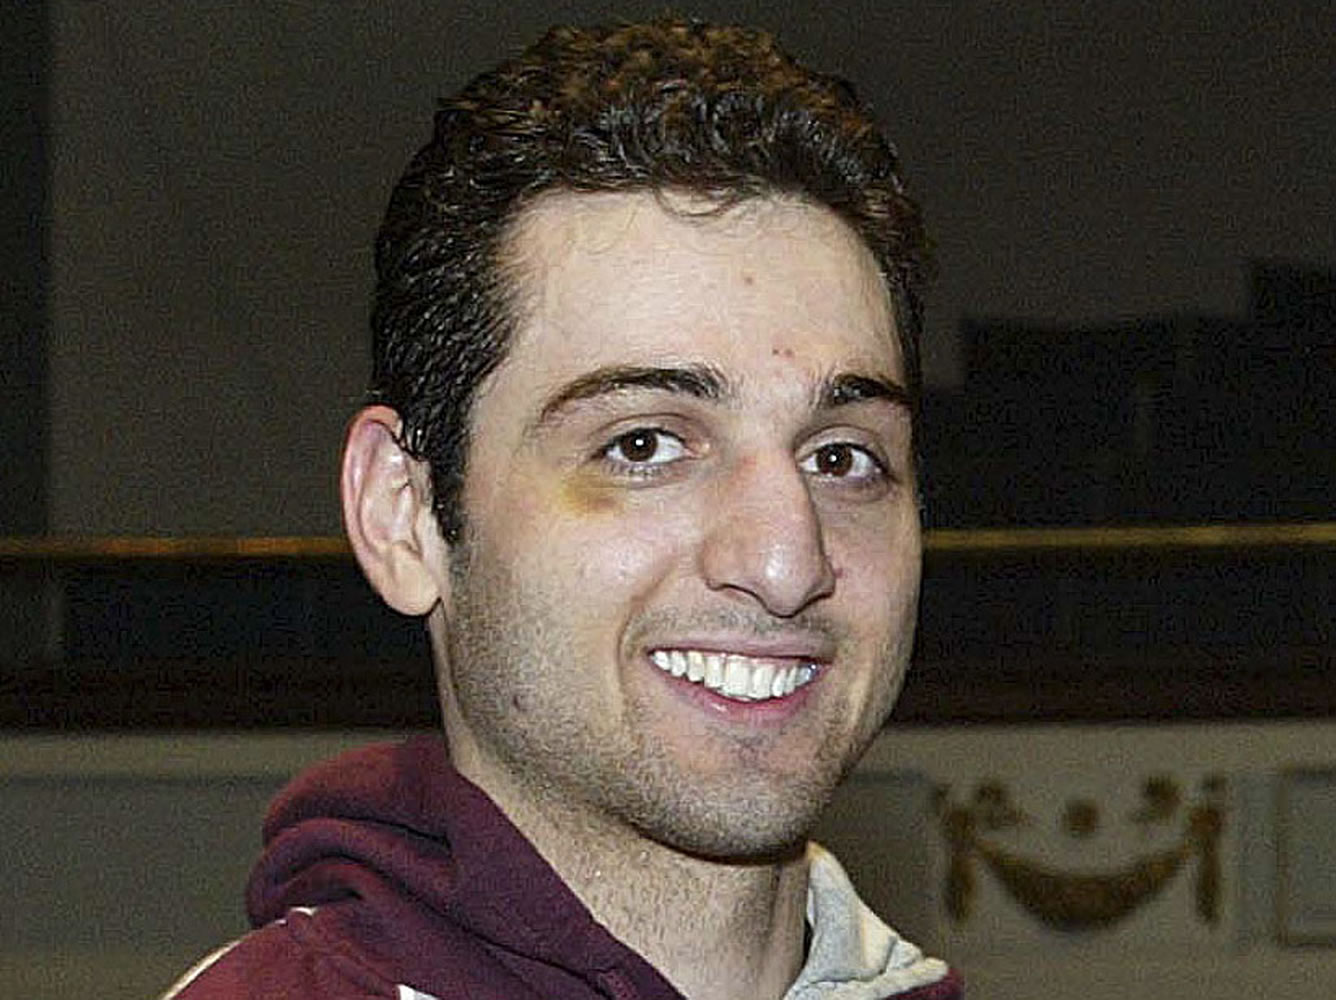 Tamerlan Tsarnaev smiles after accepting the trophy for winning the 2010 New England Golden Gloves Championship in Lowell, Mass.